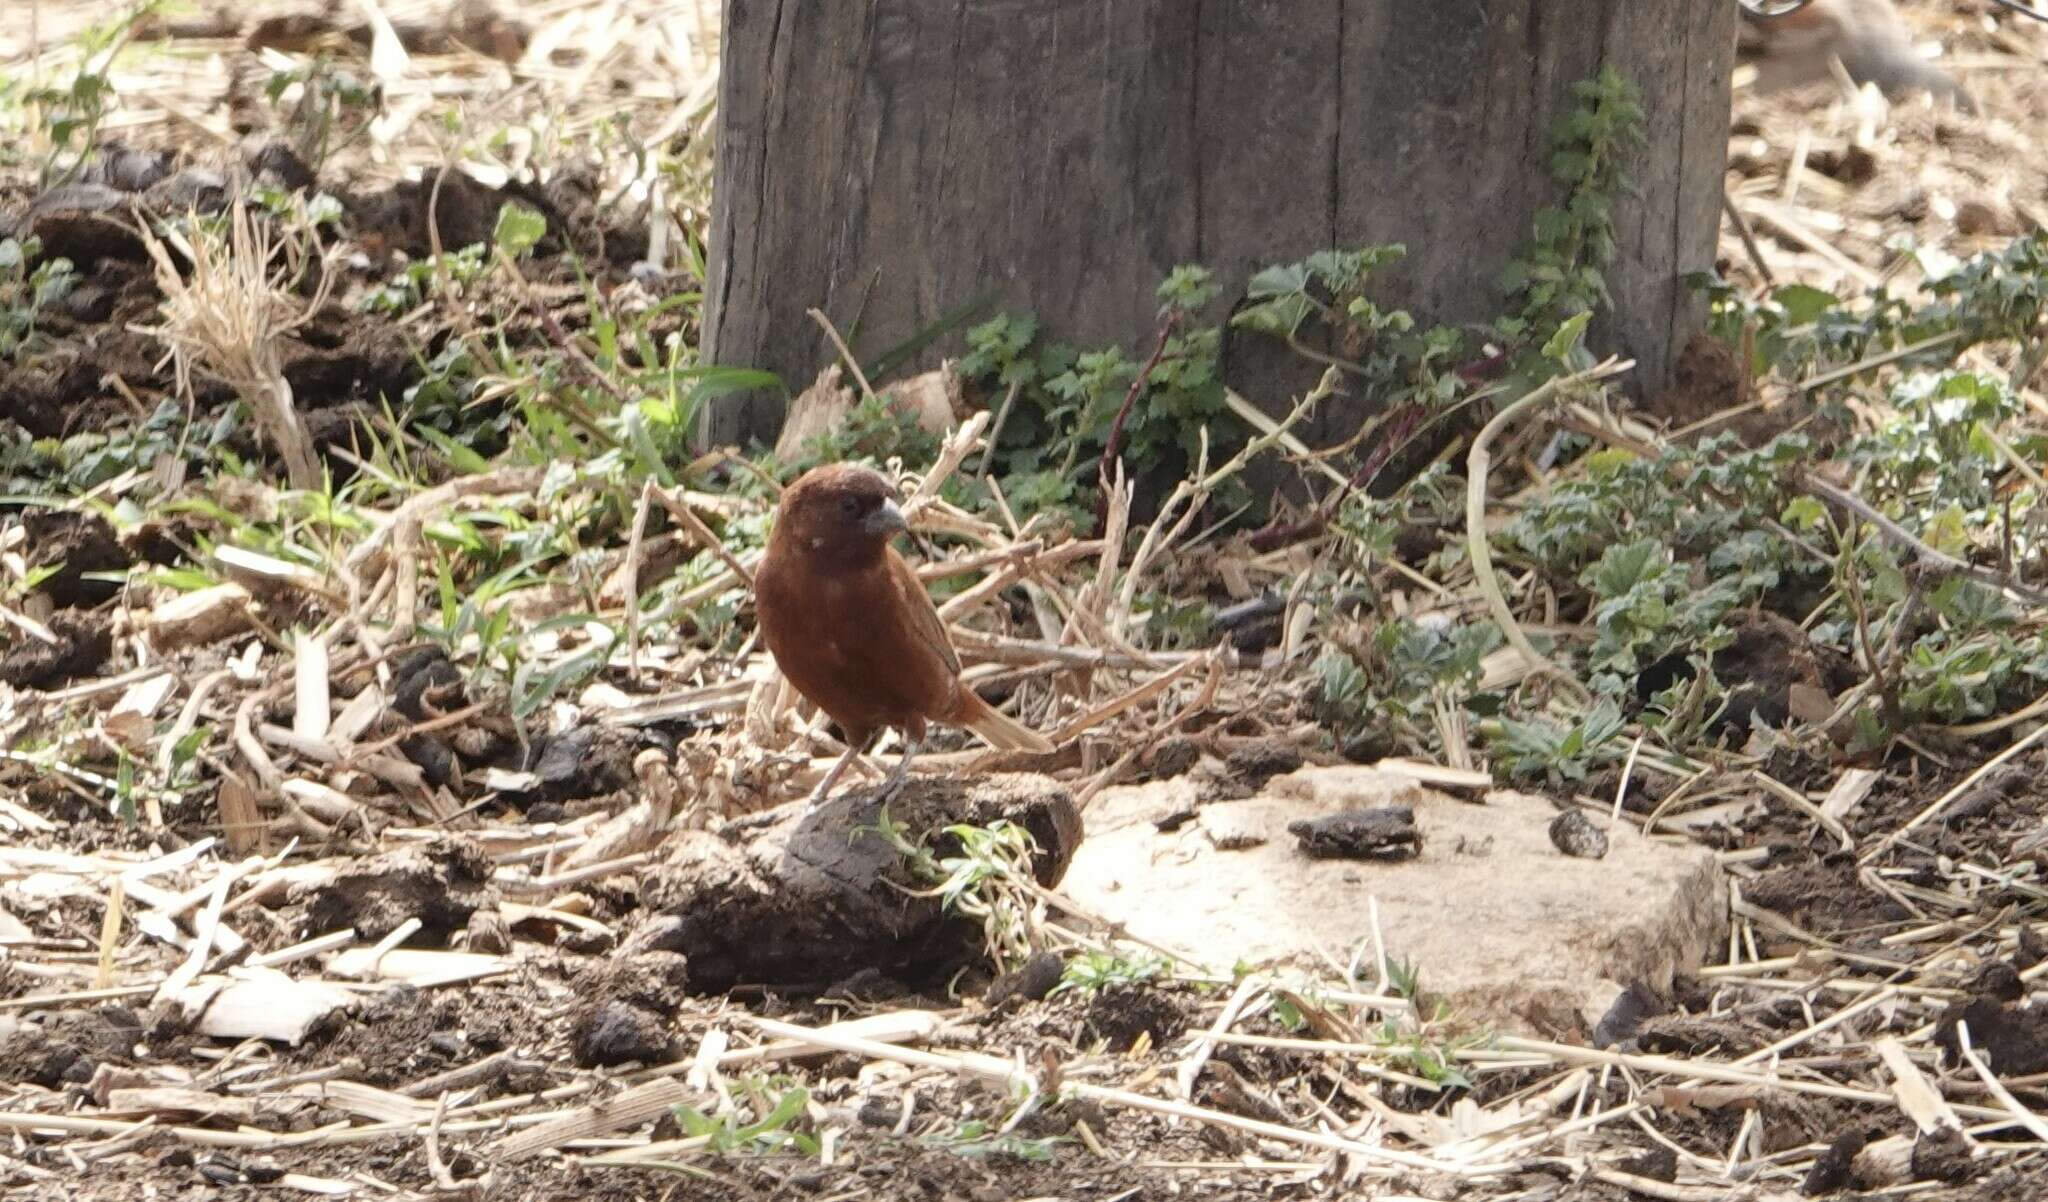 Image of Chestnut Sparrow